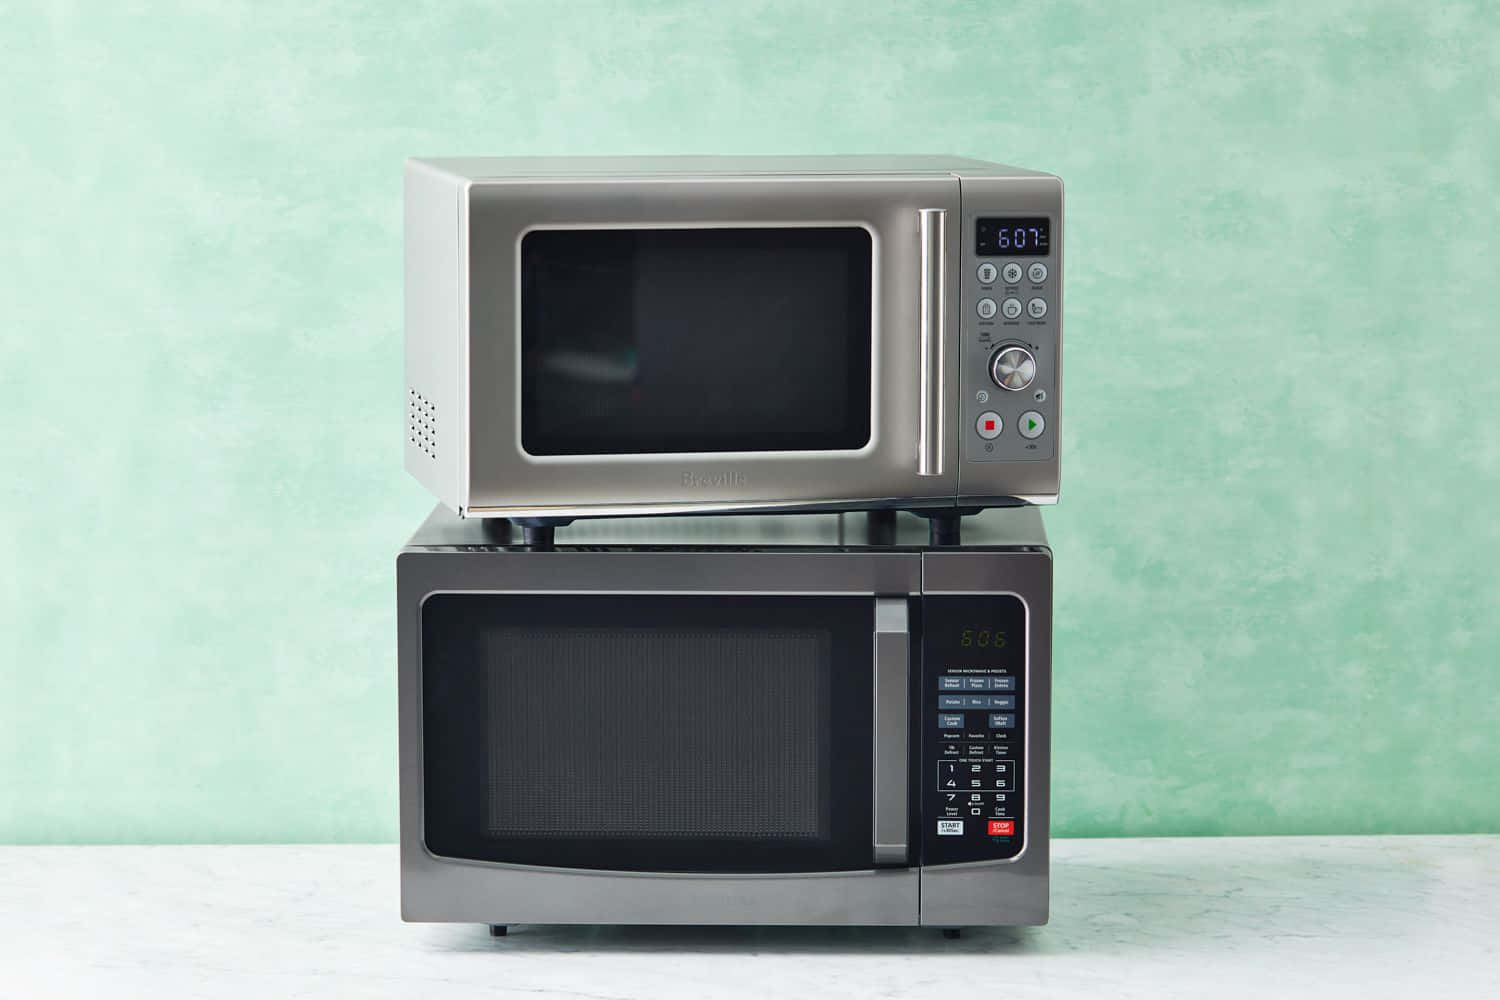 Enjoy a hot meal in minutes with a trusty microwave